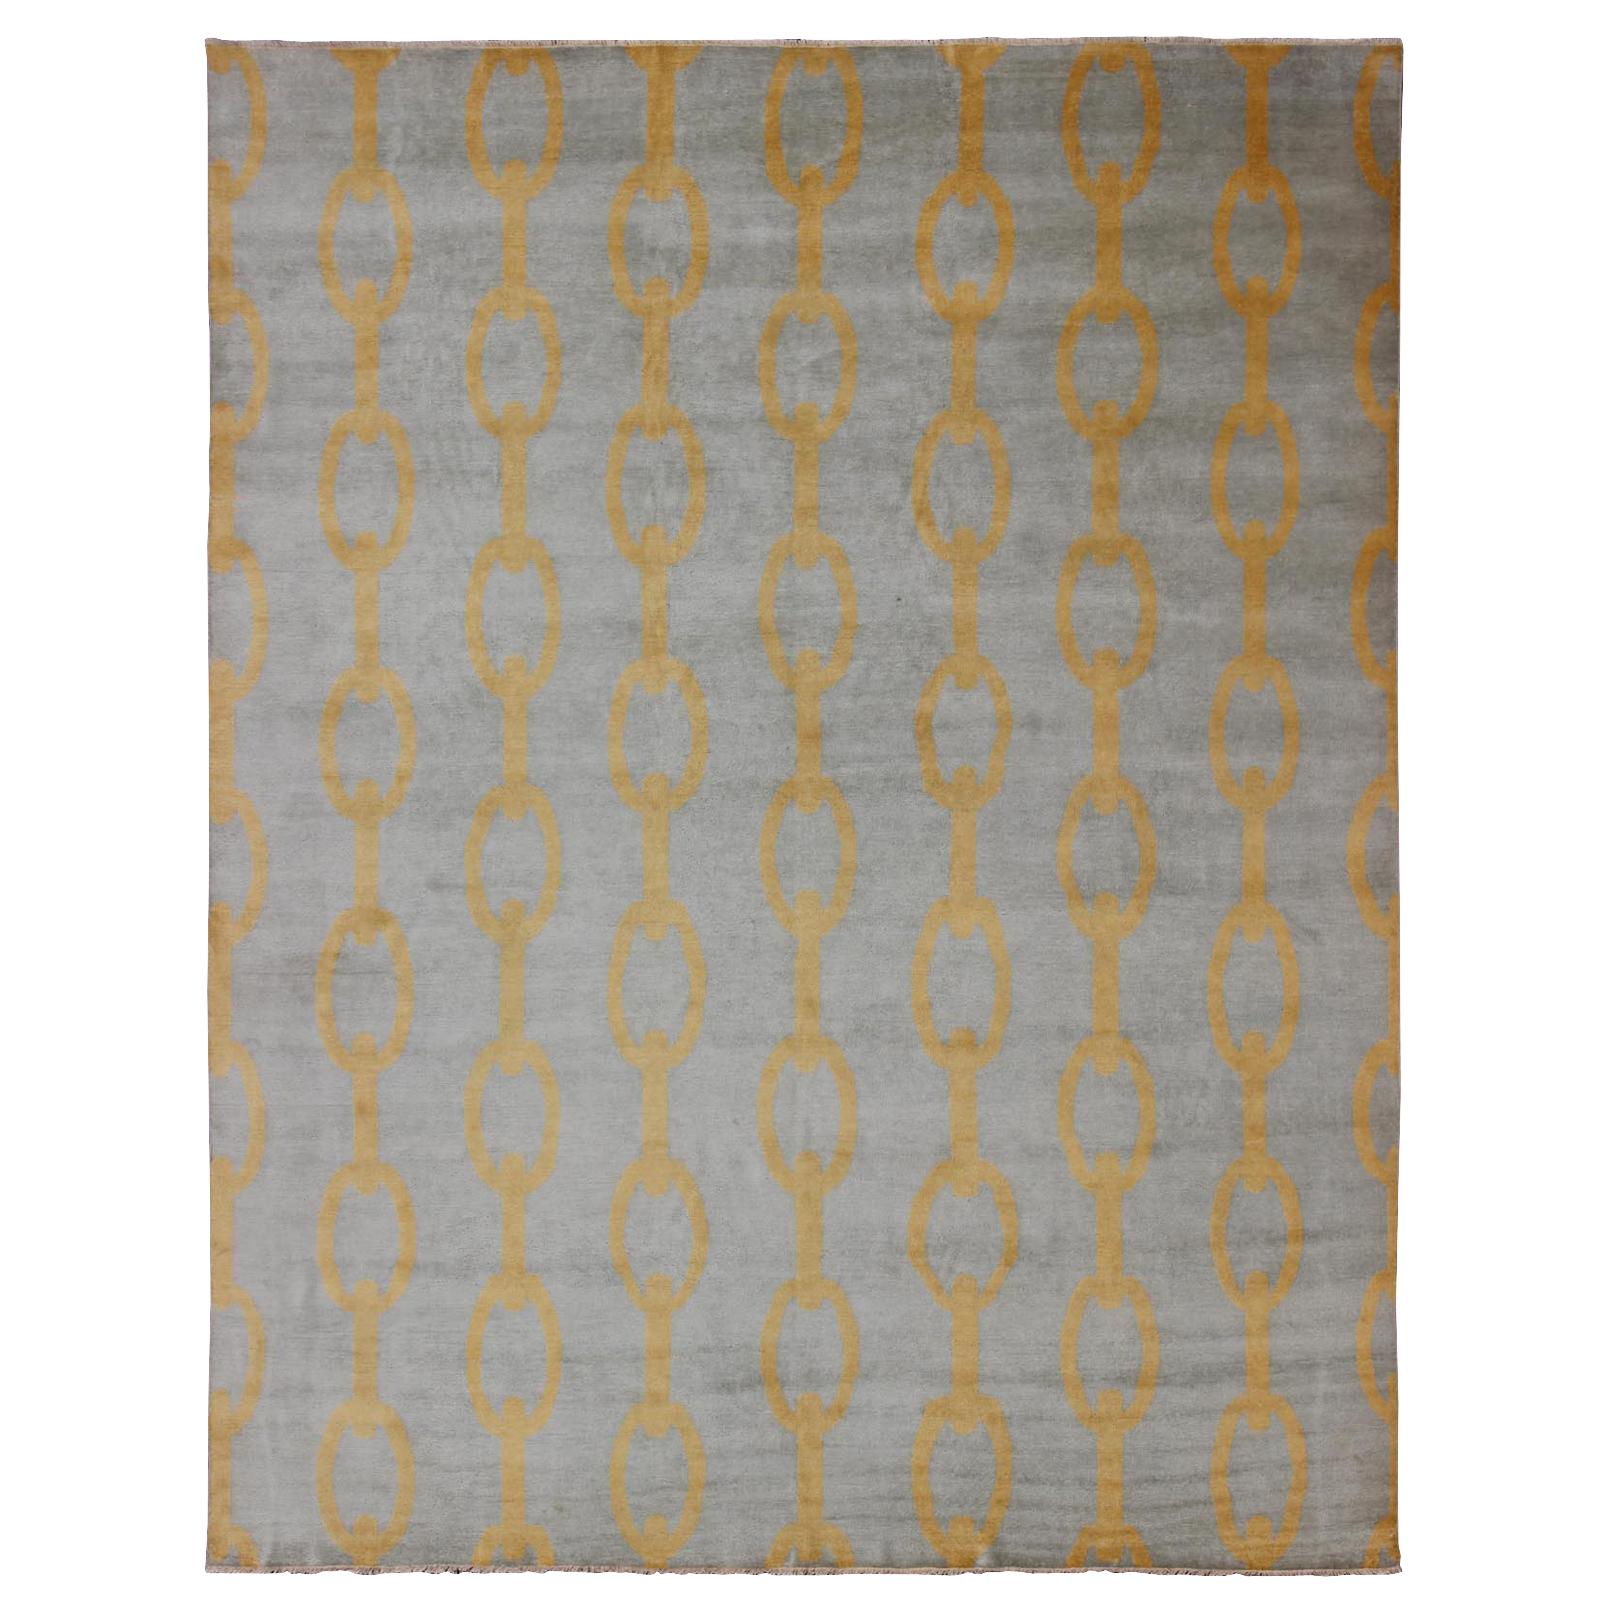 Large Modern Rug With Chain Design in Gray and Marigold Colors For Sale